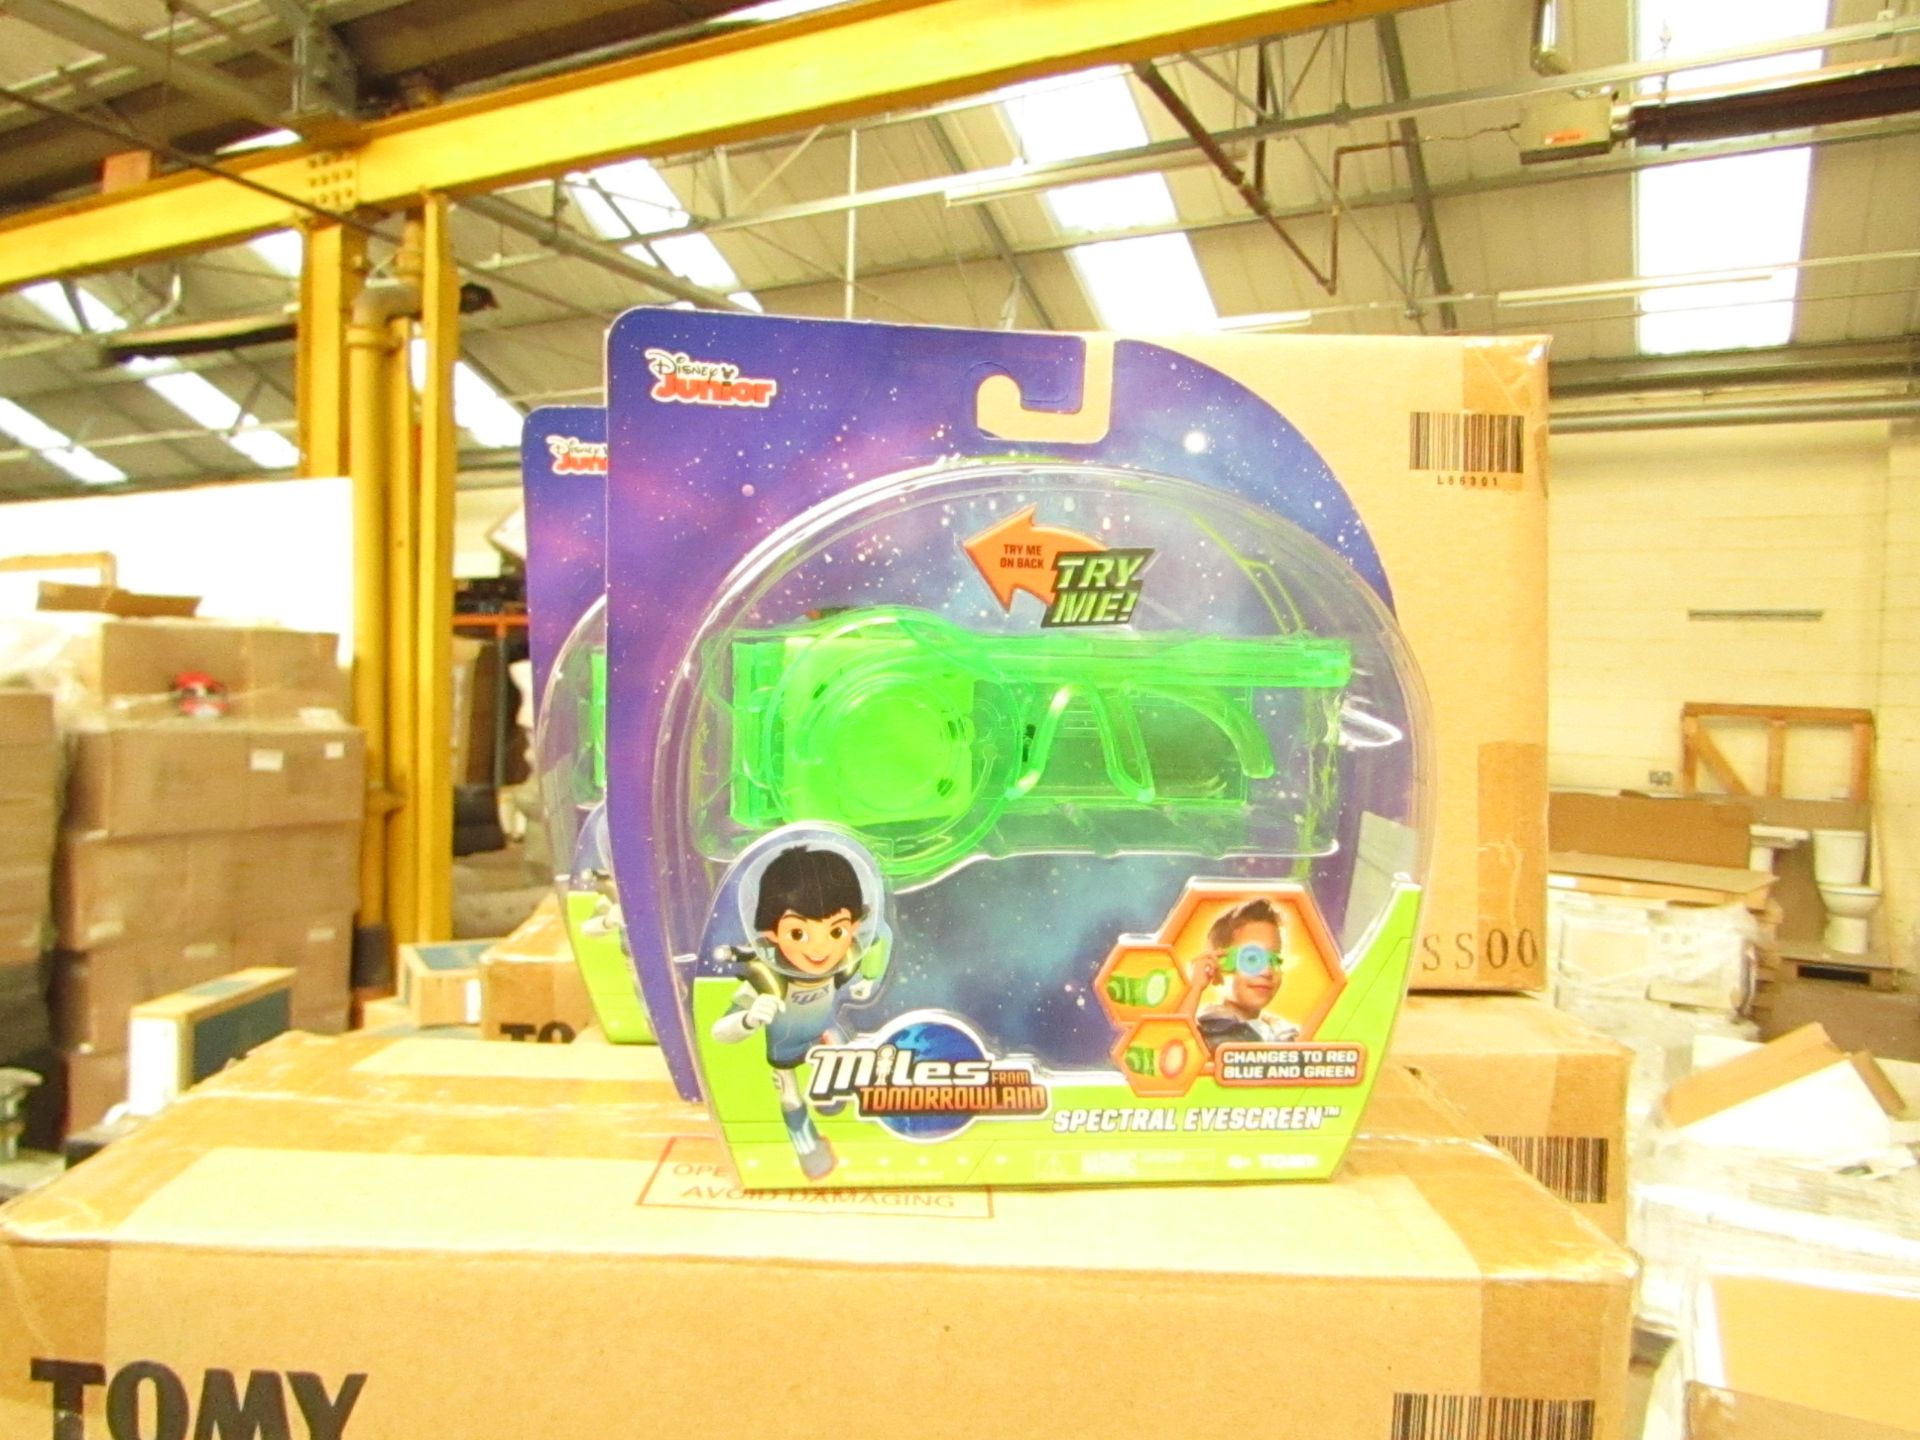 4x Miles from Tomorrowland spectral eyescreen, new and boxed.